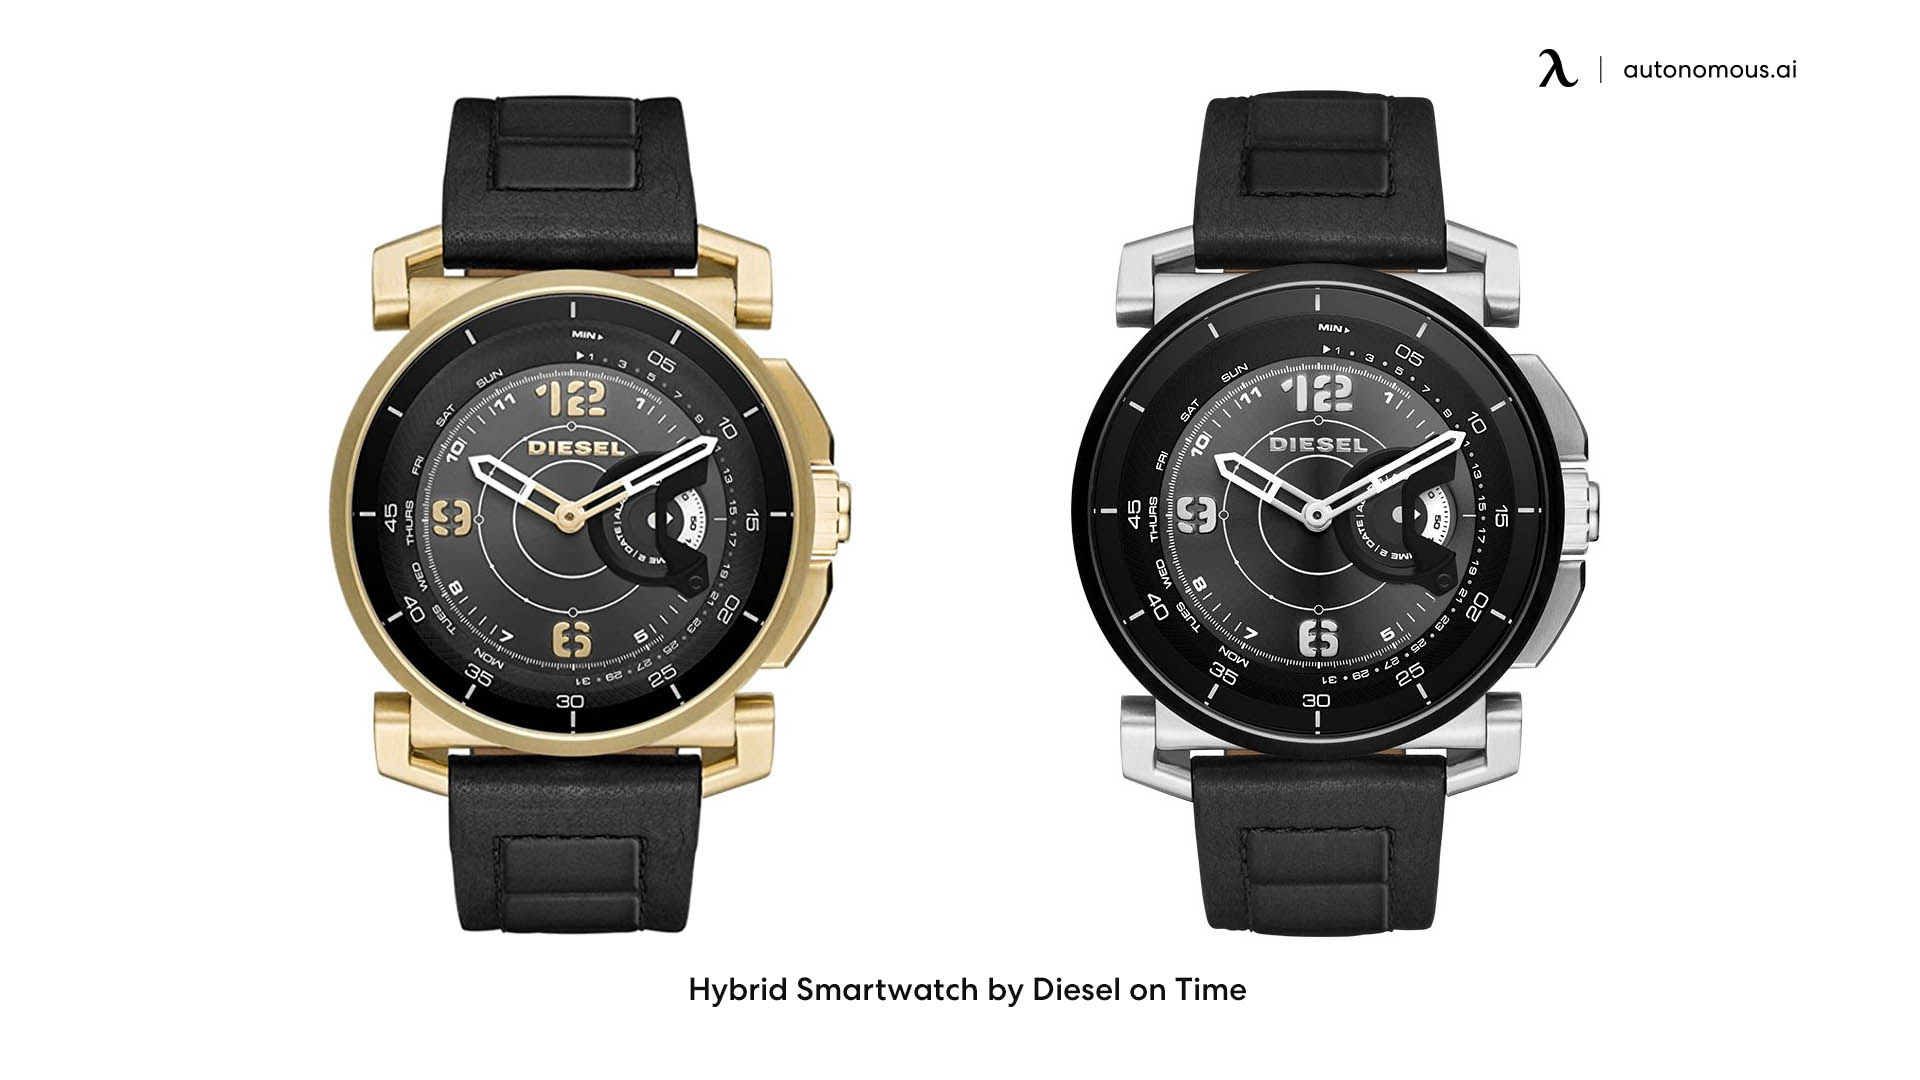 Hybrid Smartwatch by Diesel on Time